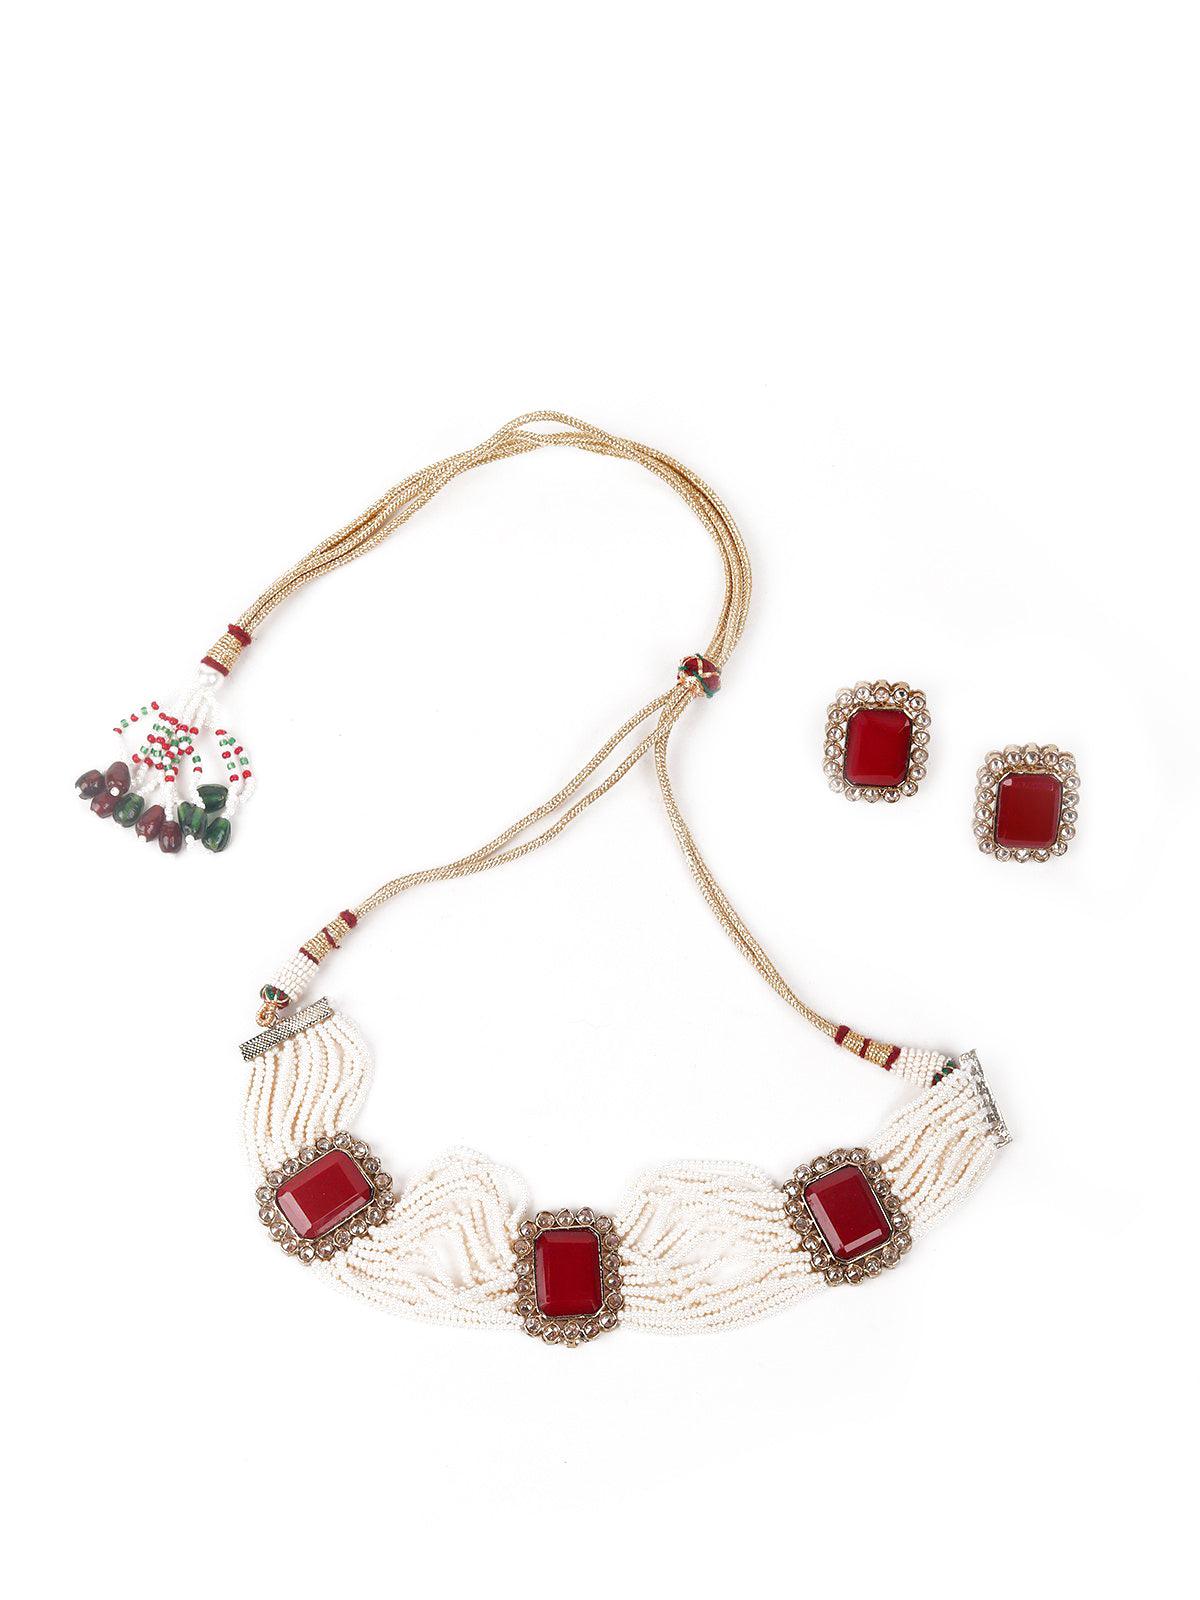 Women's White And Red Multi-Stand Beaded Necklace Choker Necklace Set - Odette